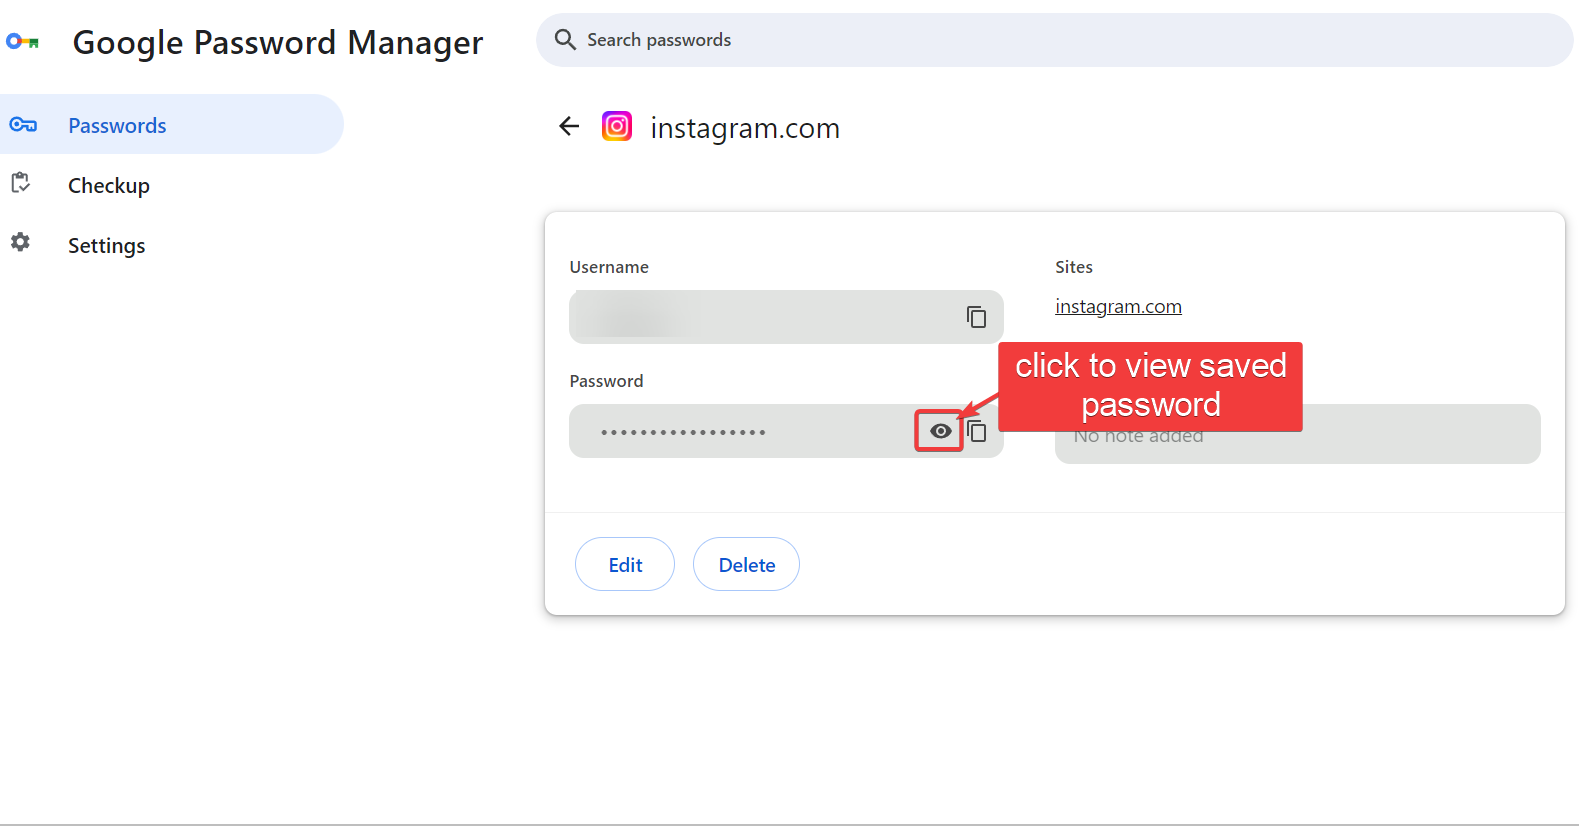 click to view saved password